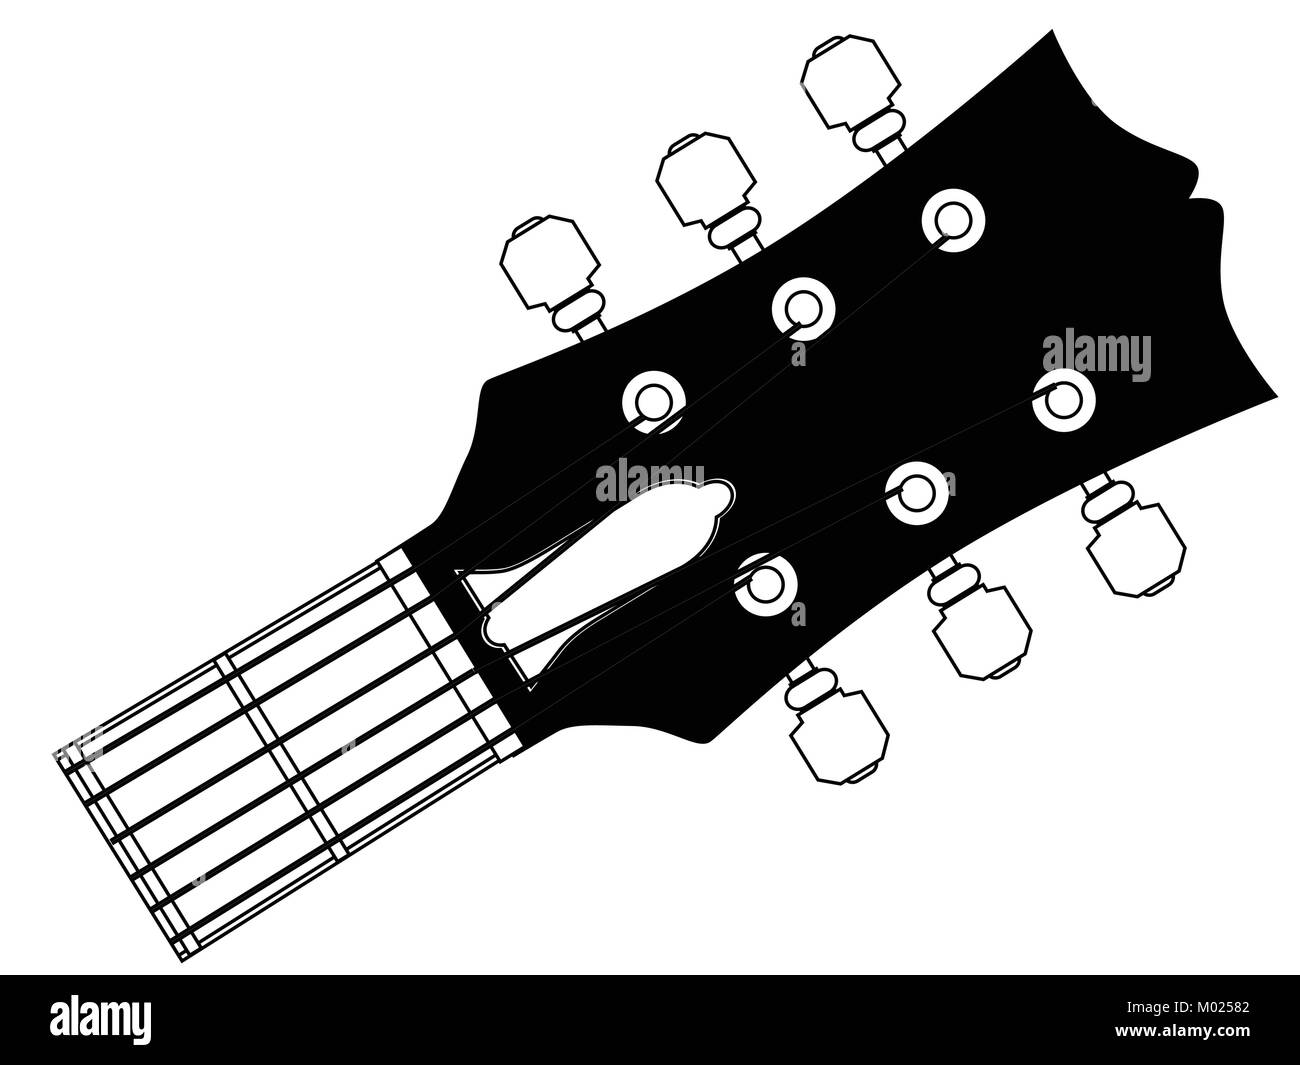 A traditional guitar headstock with strings and tuners. Stock Vector